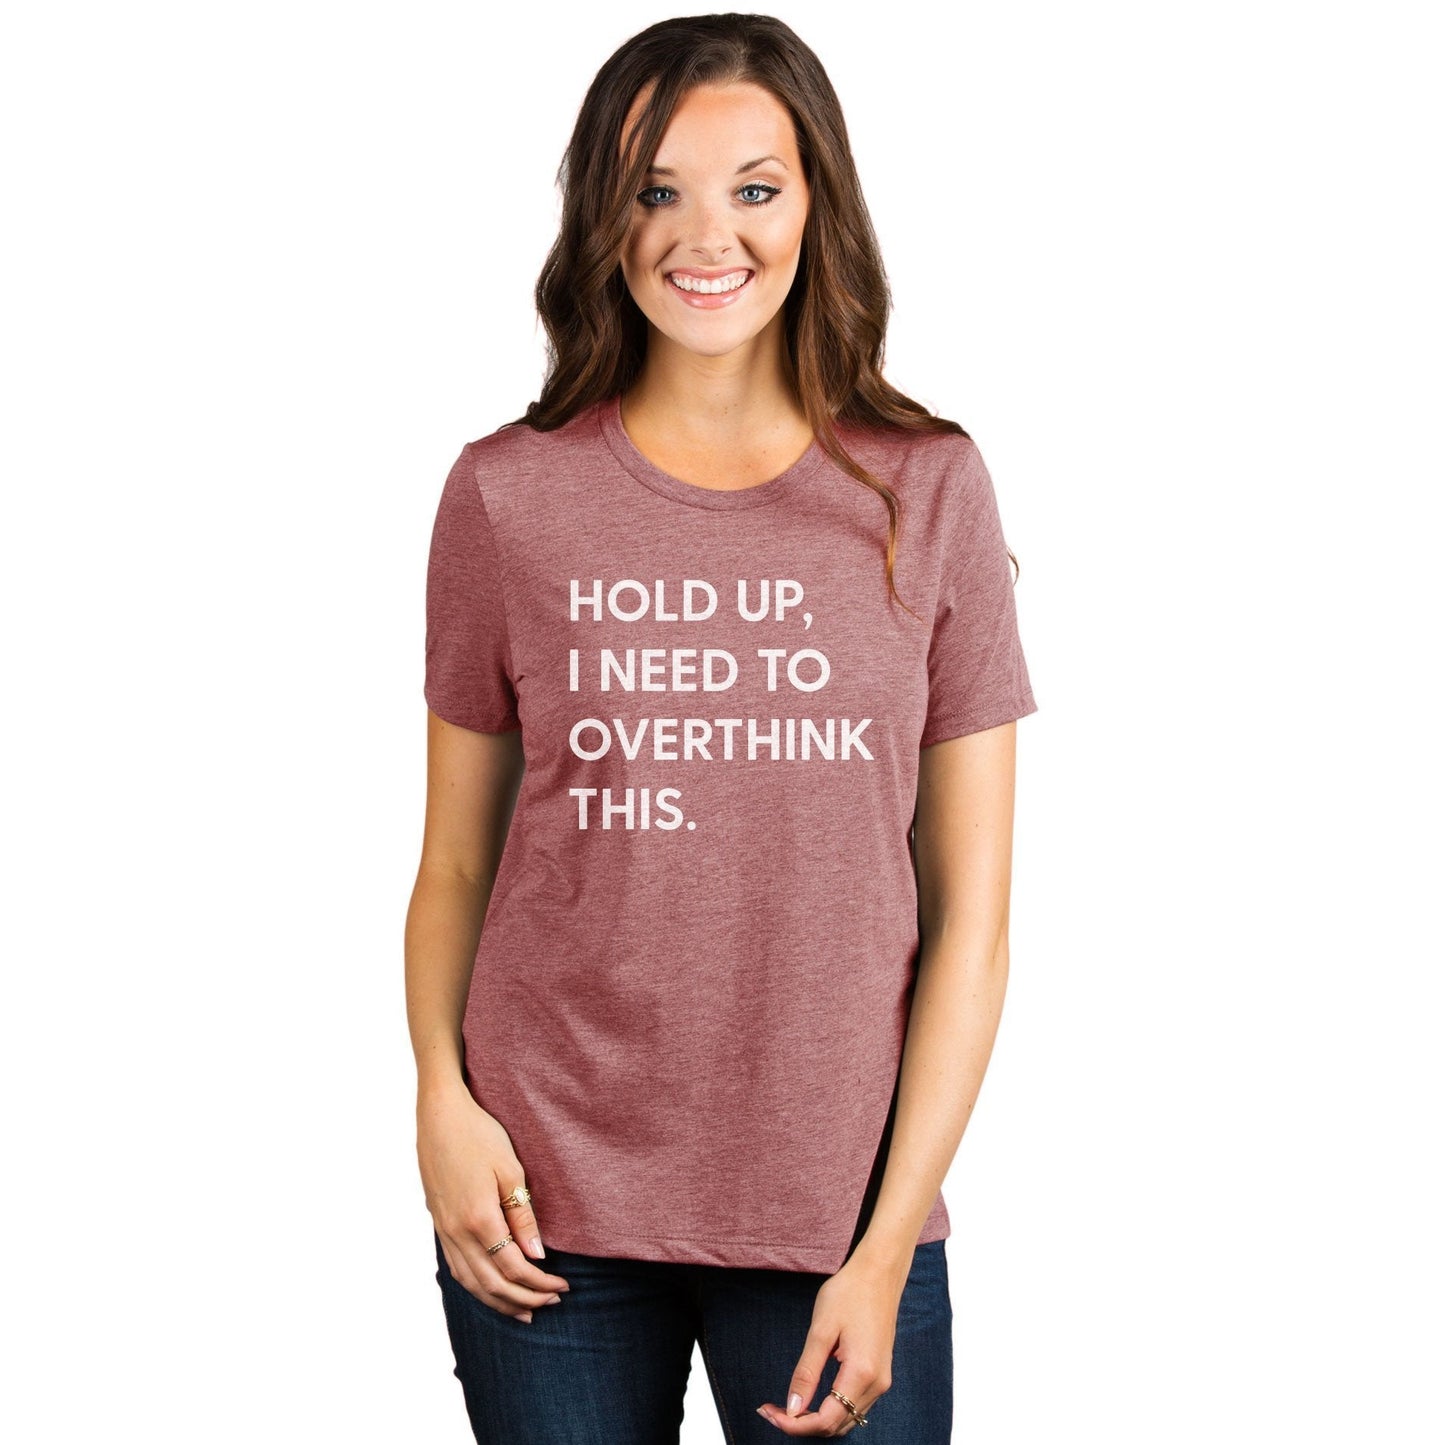 Hold Up, I Need To Rethink This Women's Relaxed Crewneck T-Shirt Top Tee Heather Rouge Model
